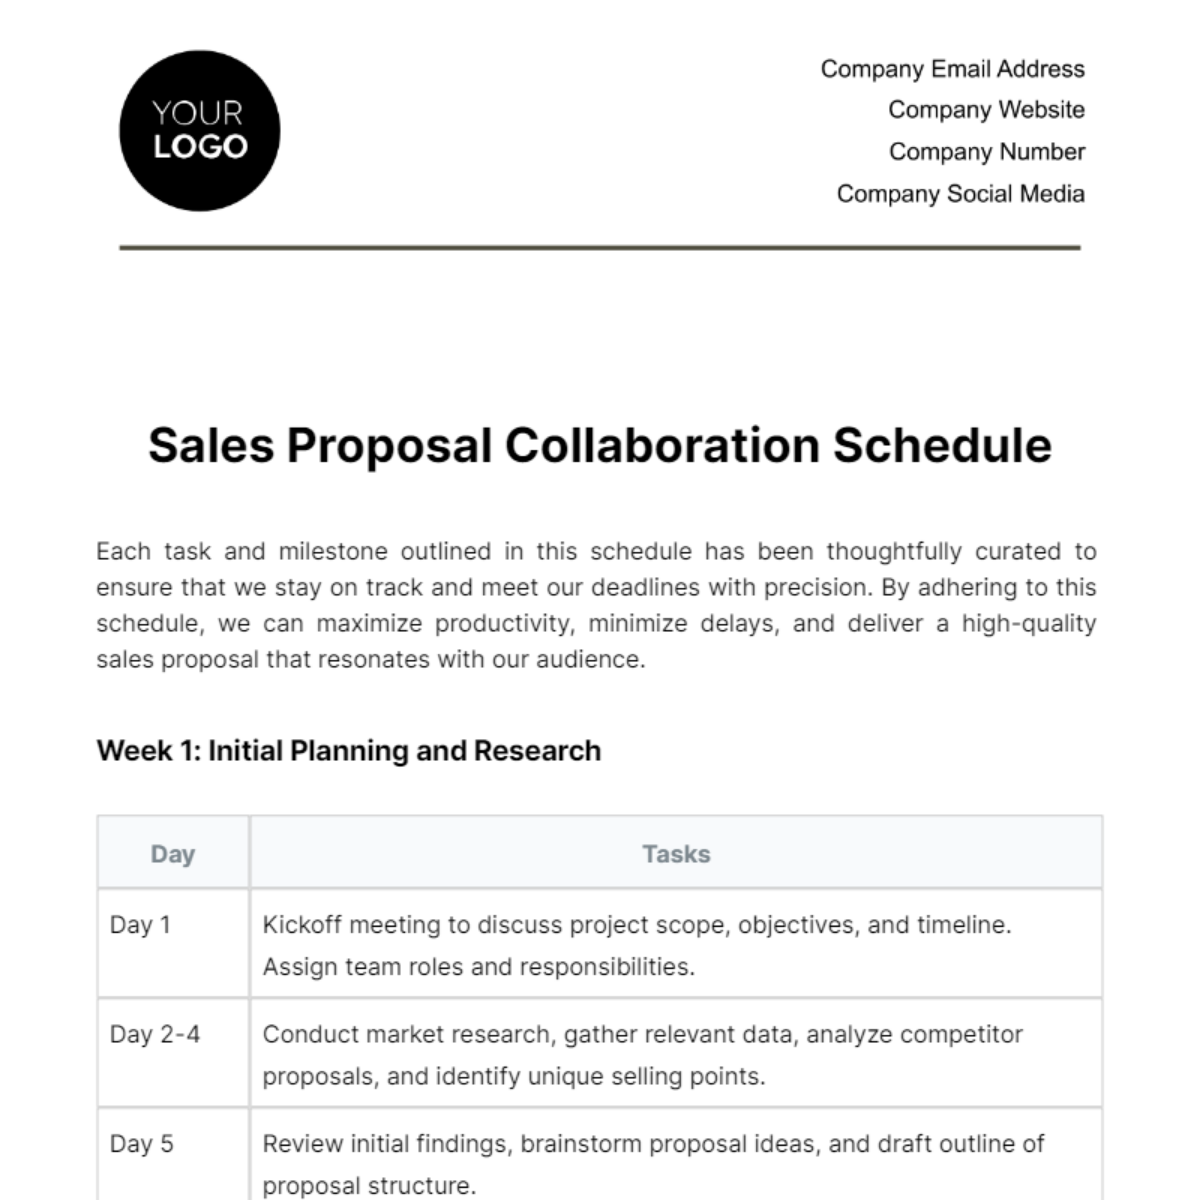 Sales Proposal Collaboration Schedule Template